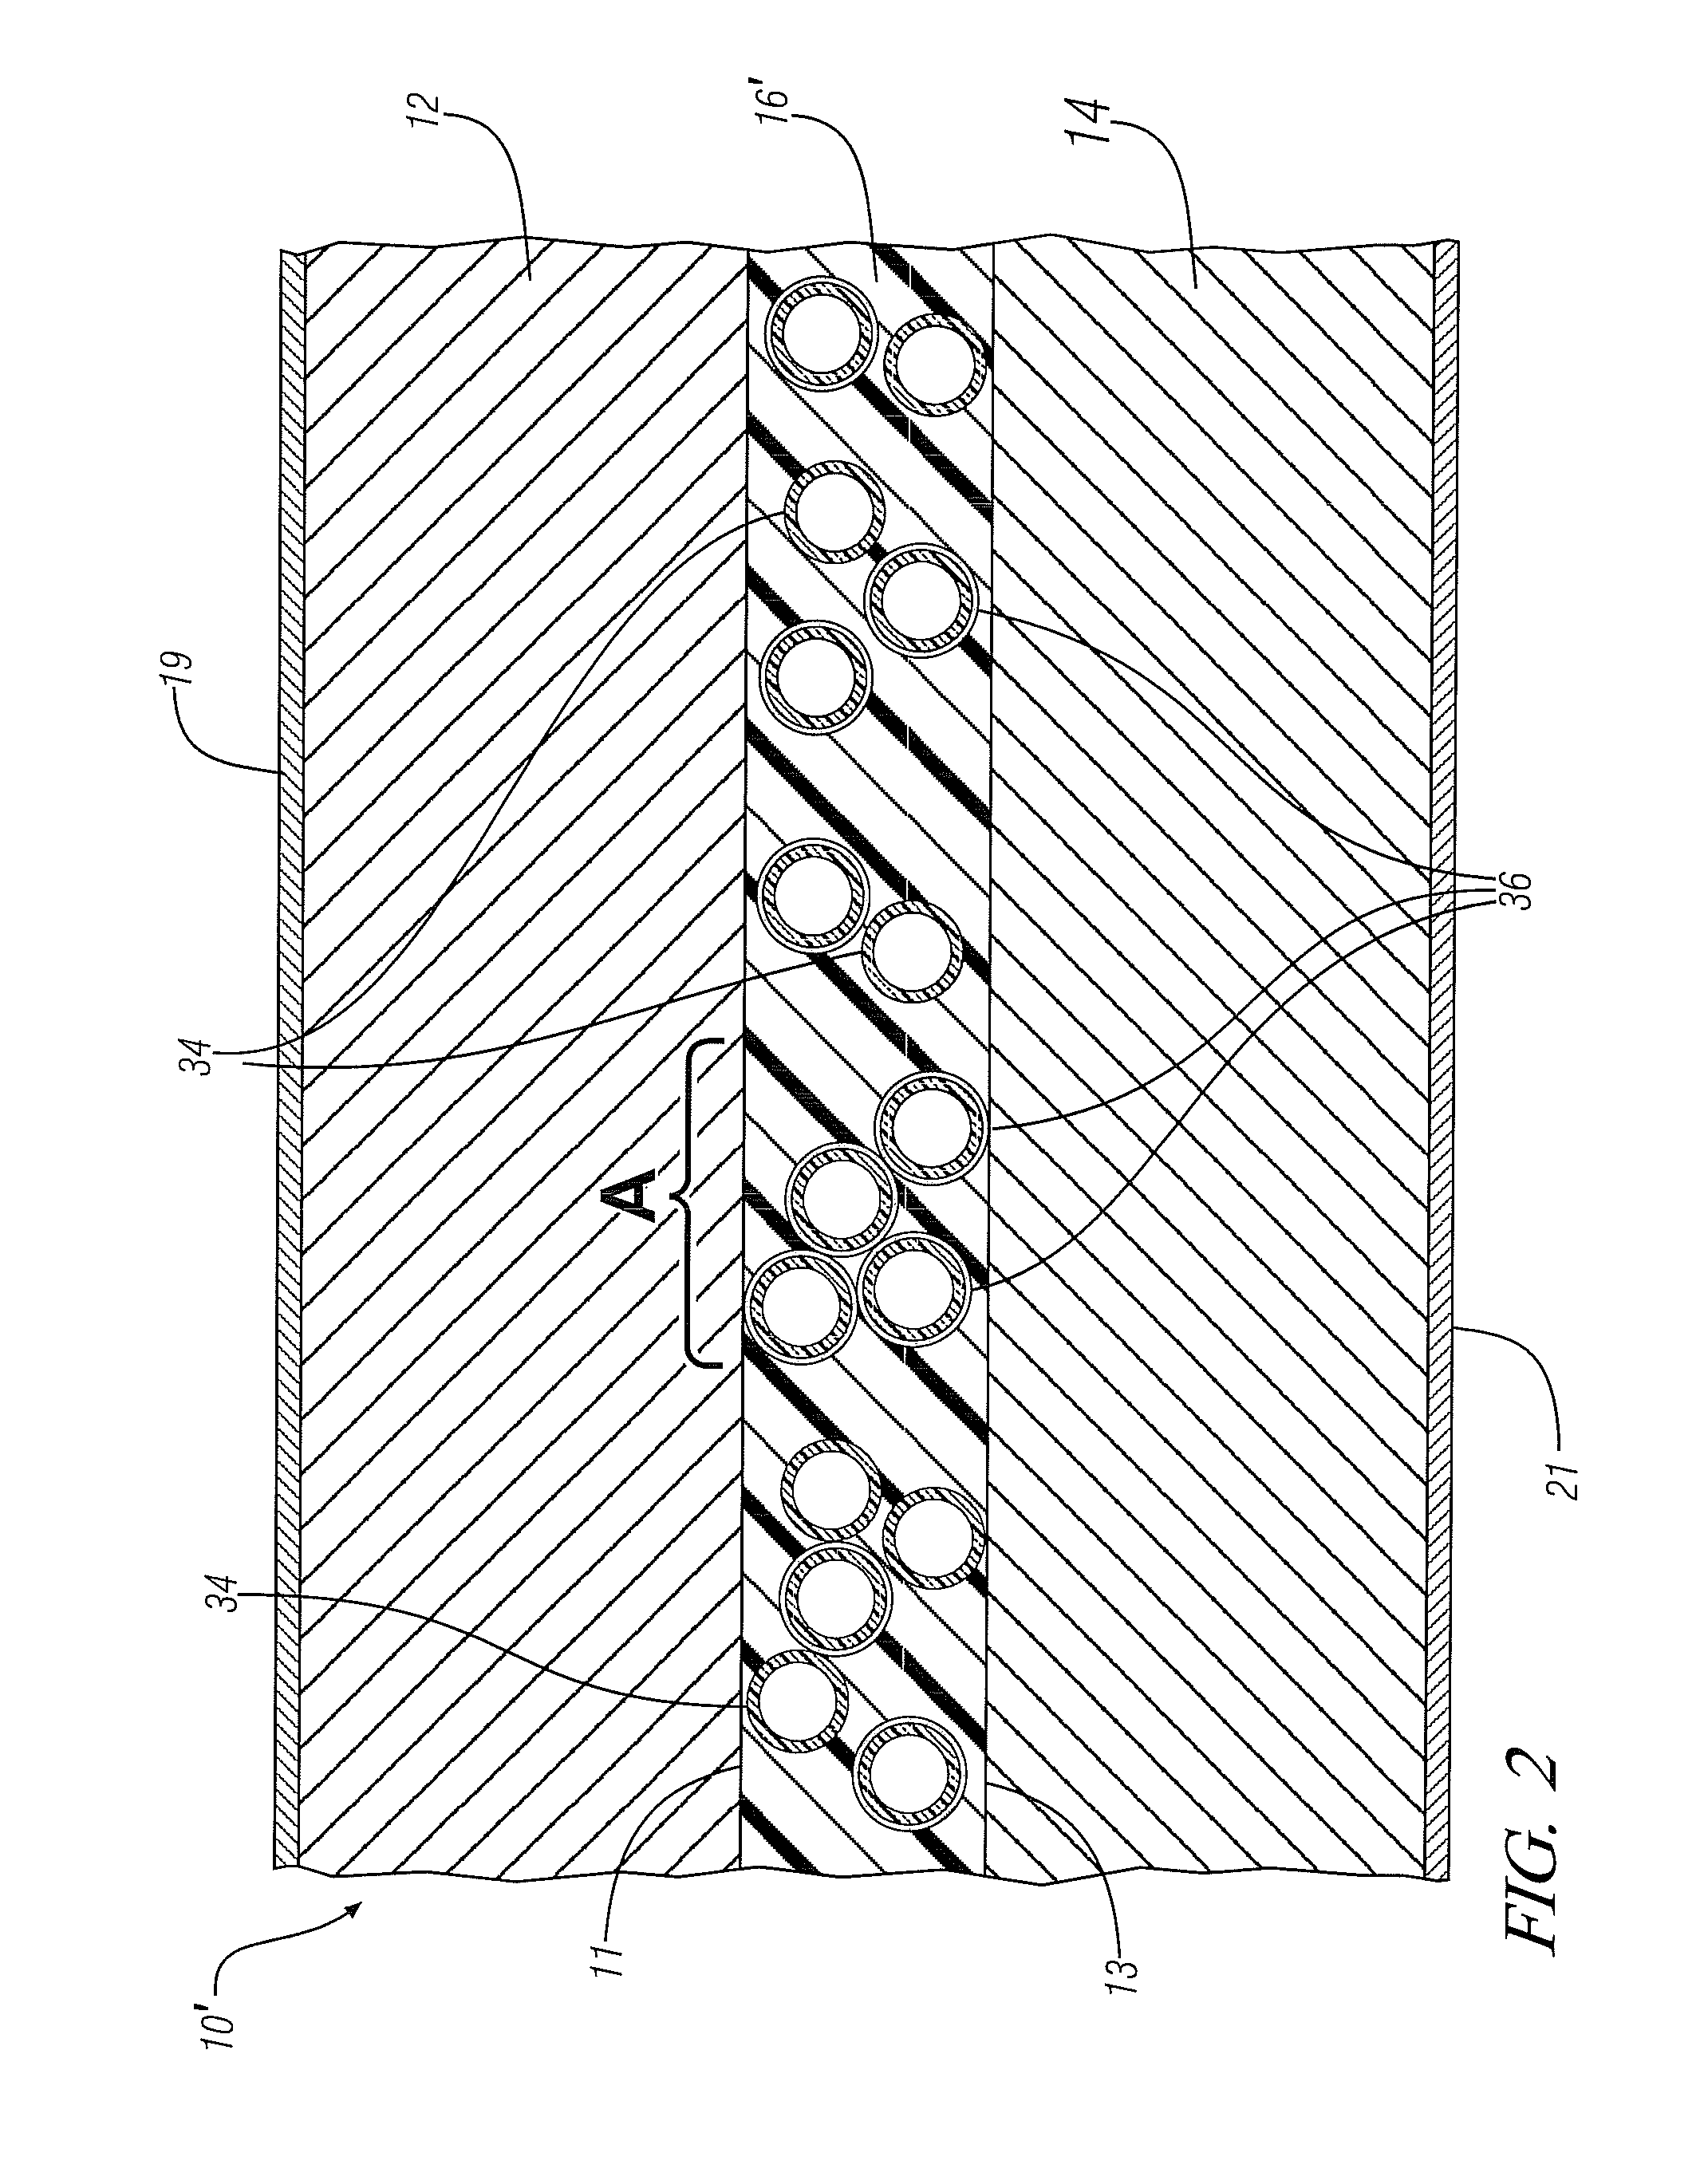 Laminated steel with compliant viscoelastic core